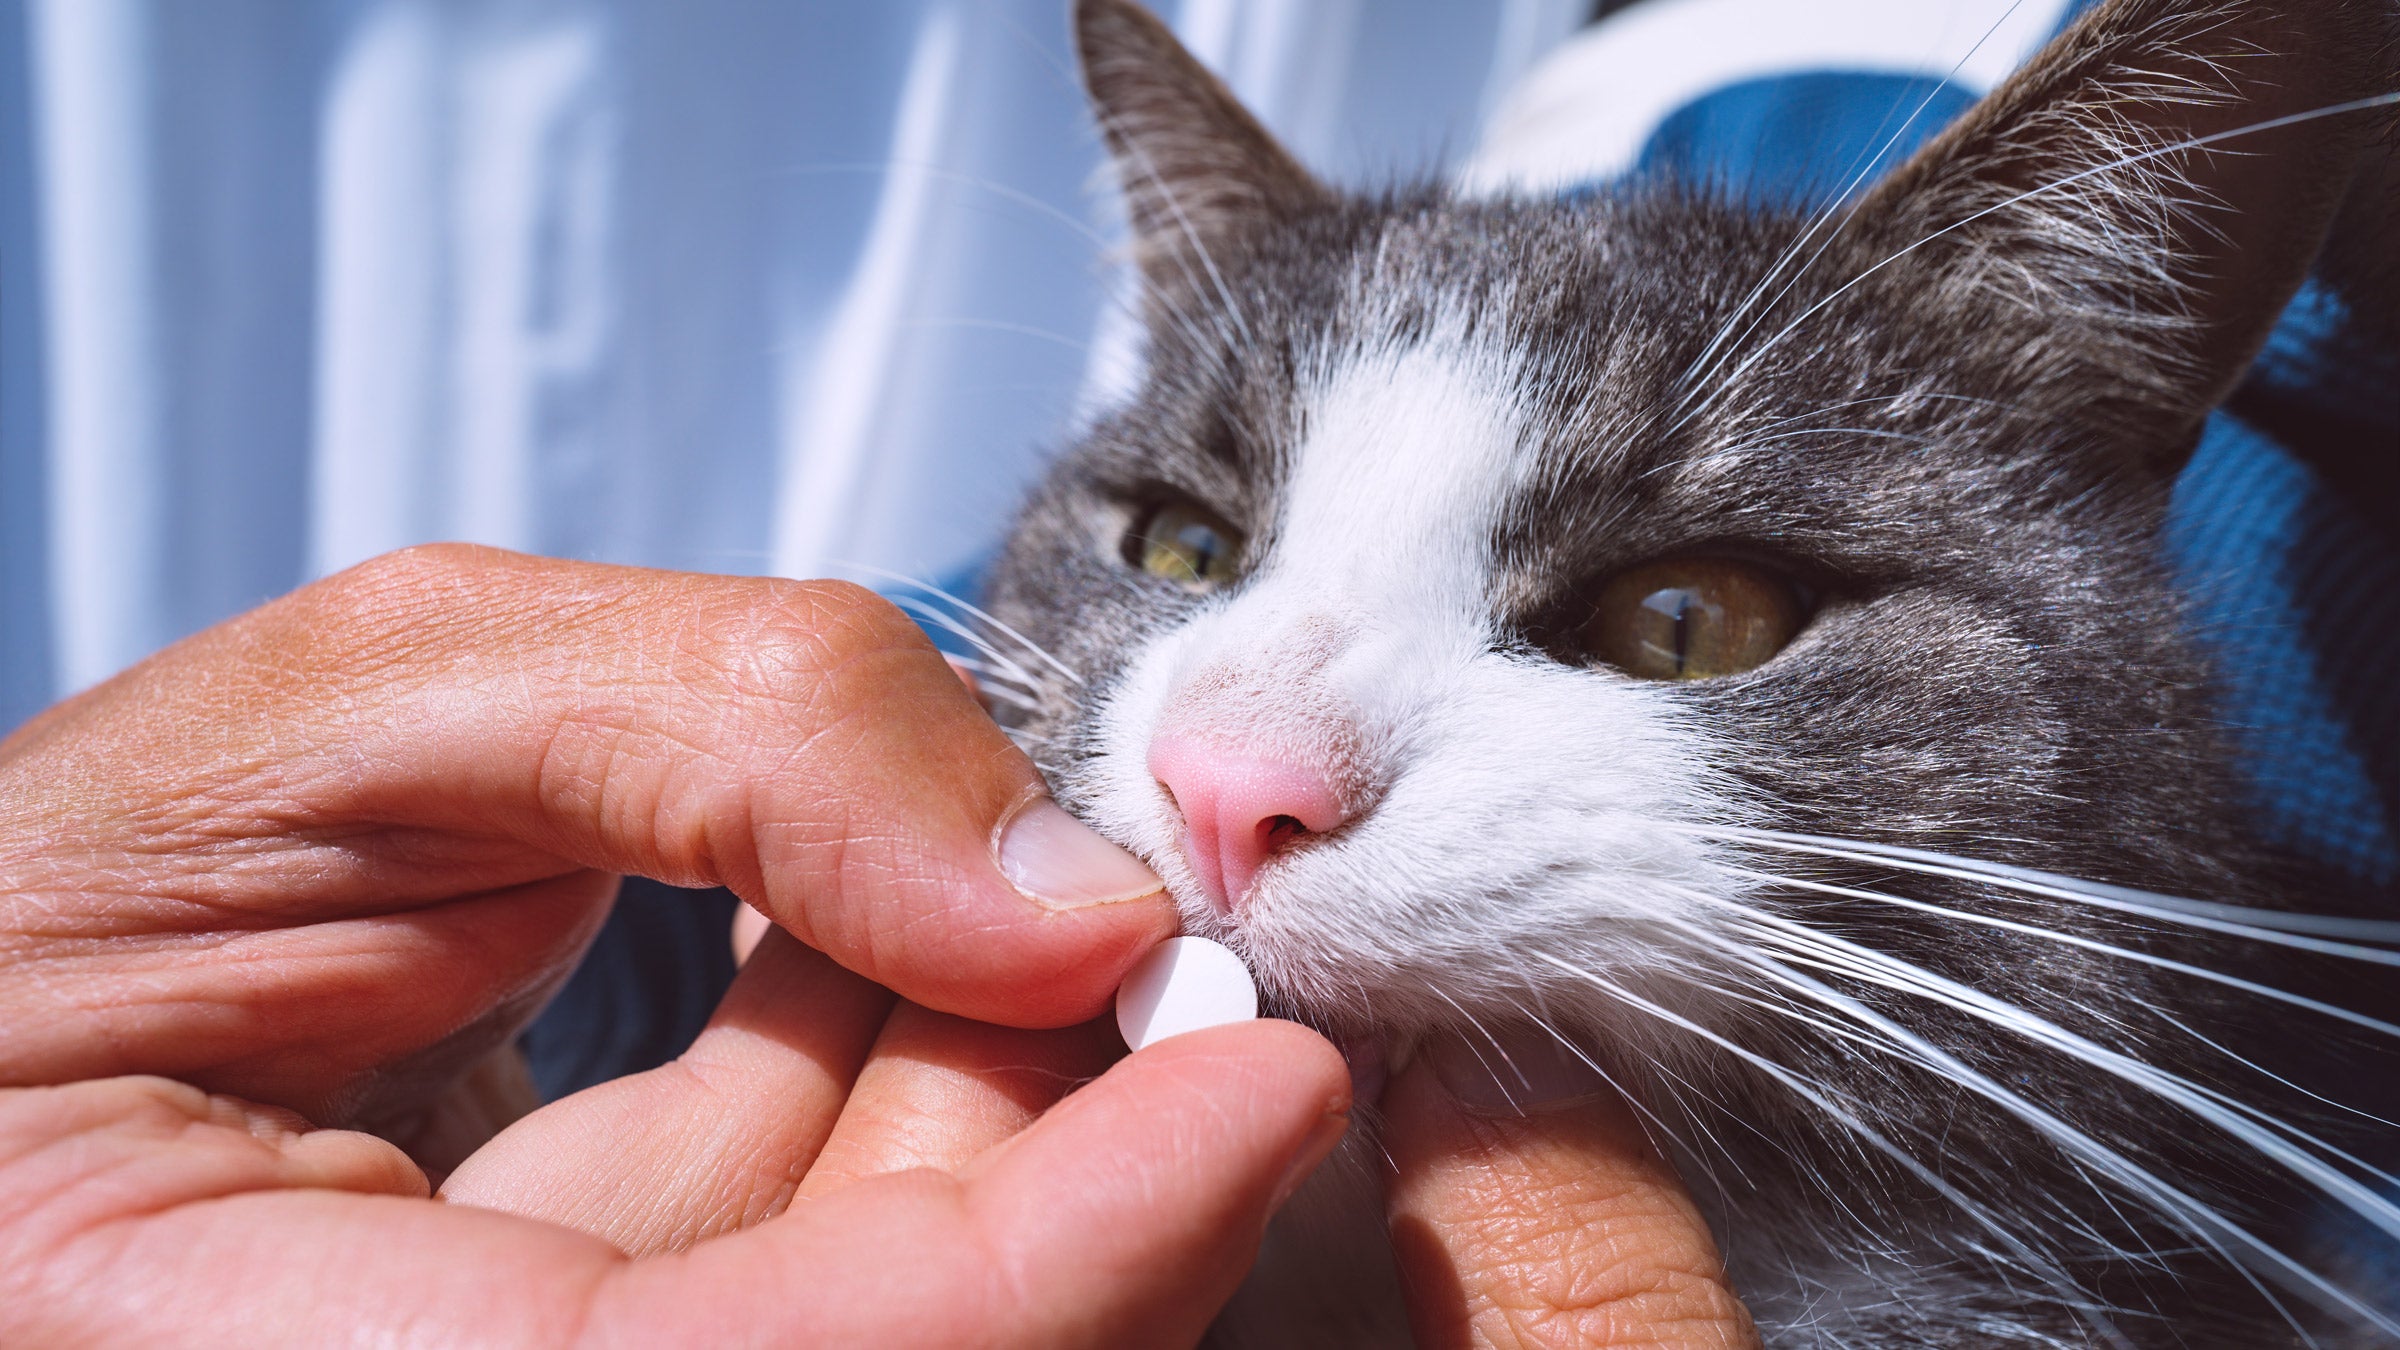 Metronidazole for Cats: How Flagyl Works, Side Effects, and More - GoodRx